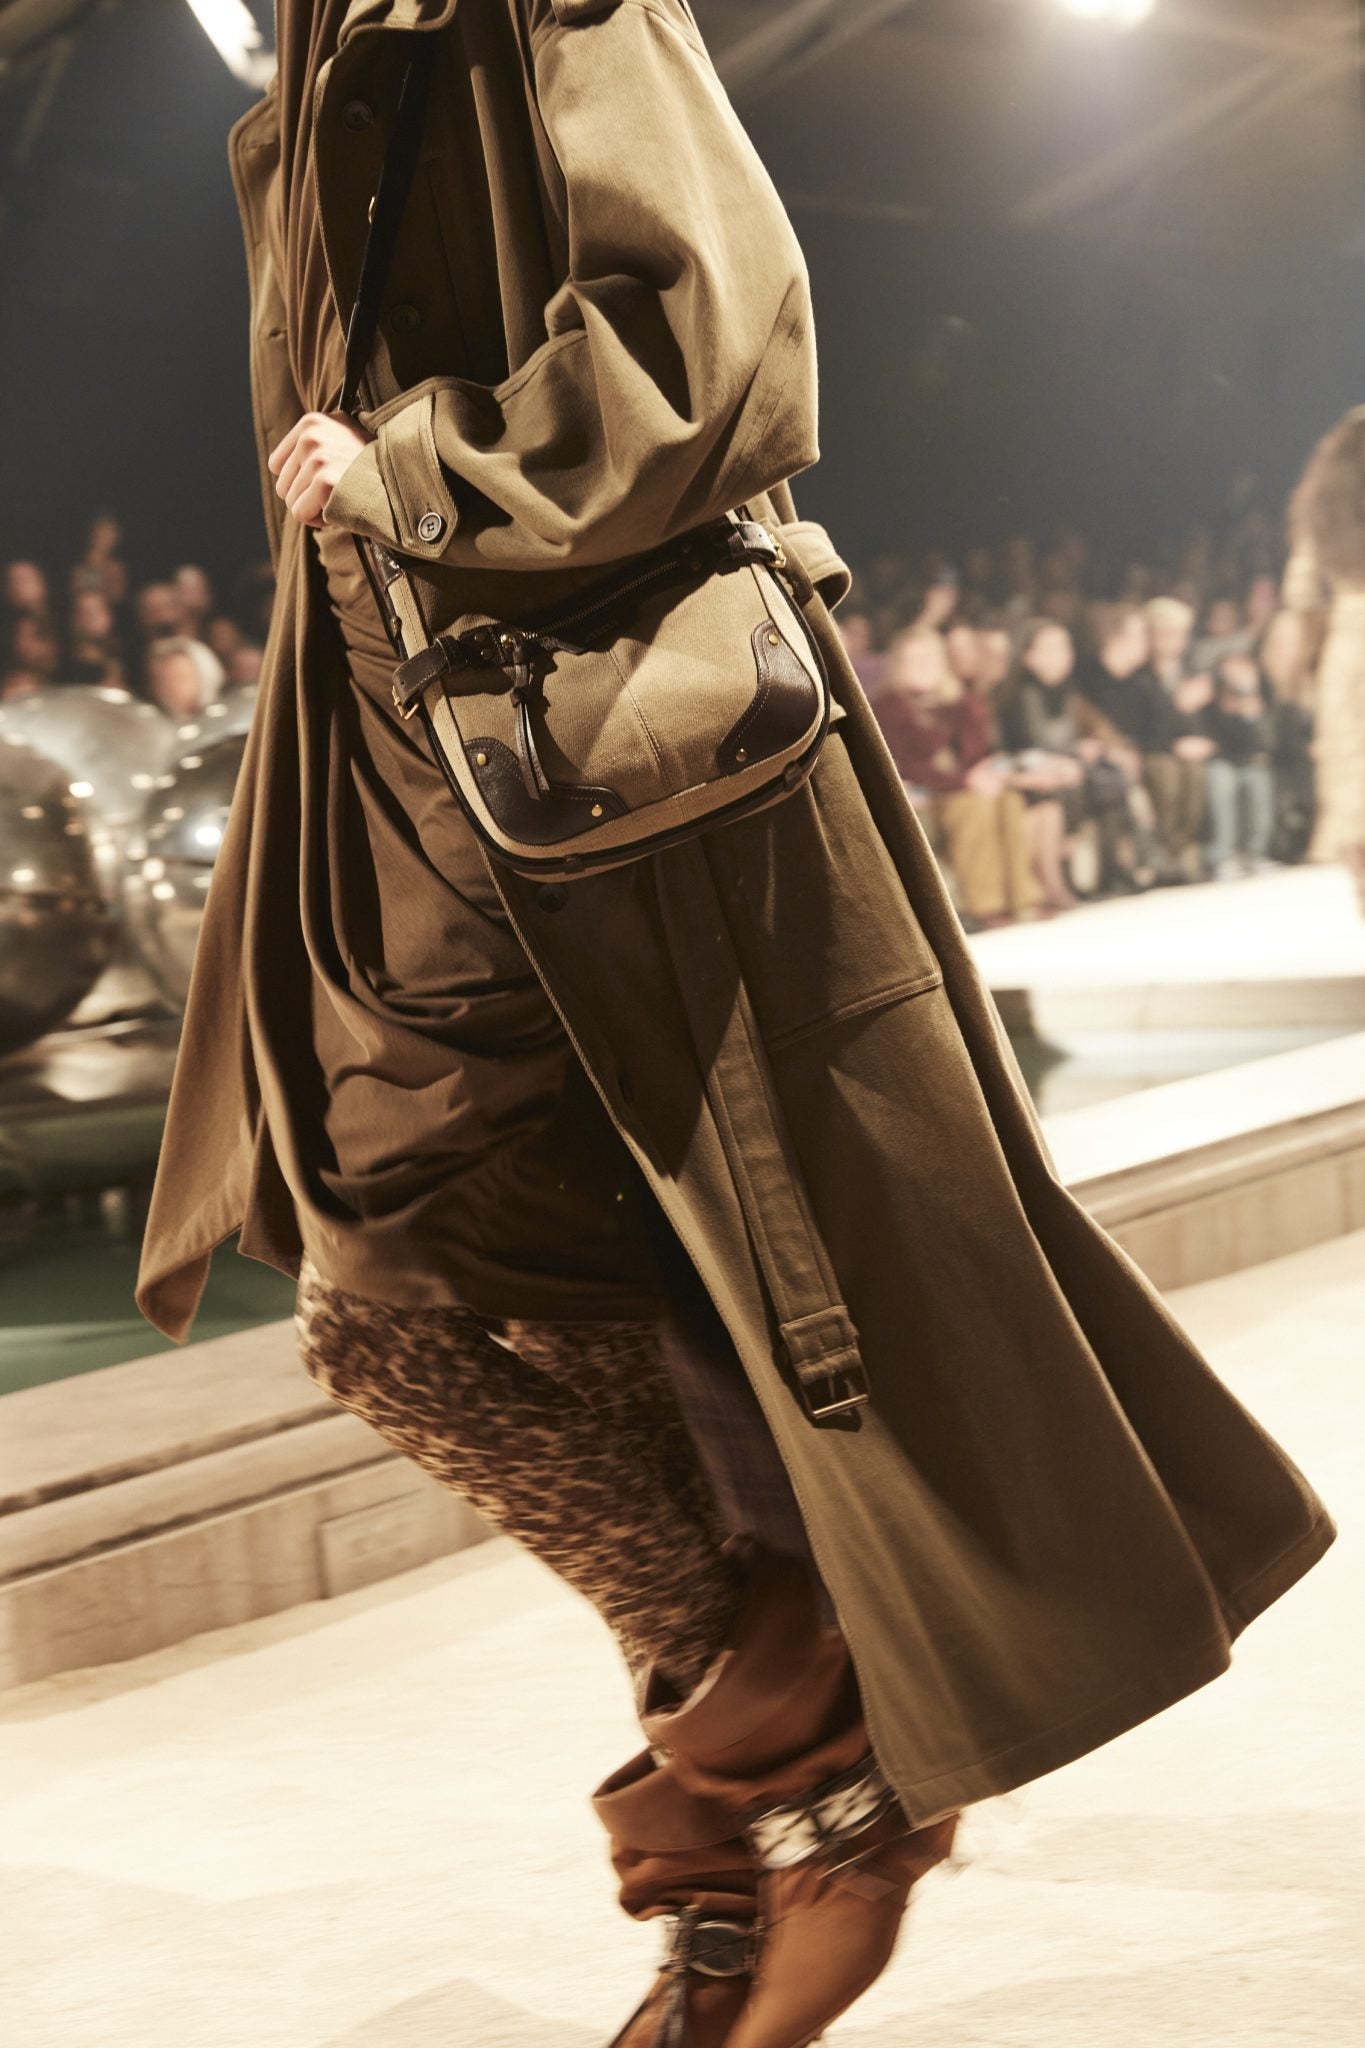 Cropped catwalk image of model wearing an oversized tan trench, brown gathered dress, leopard-printed tights and slouchy brown boots, carrying a messenger bag.